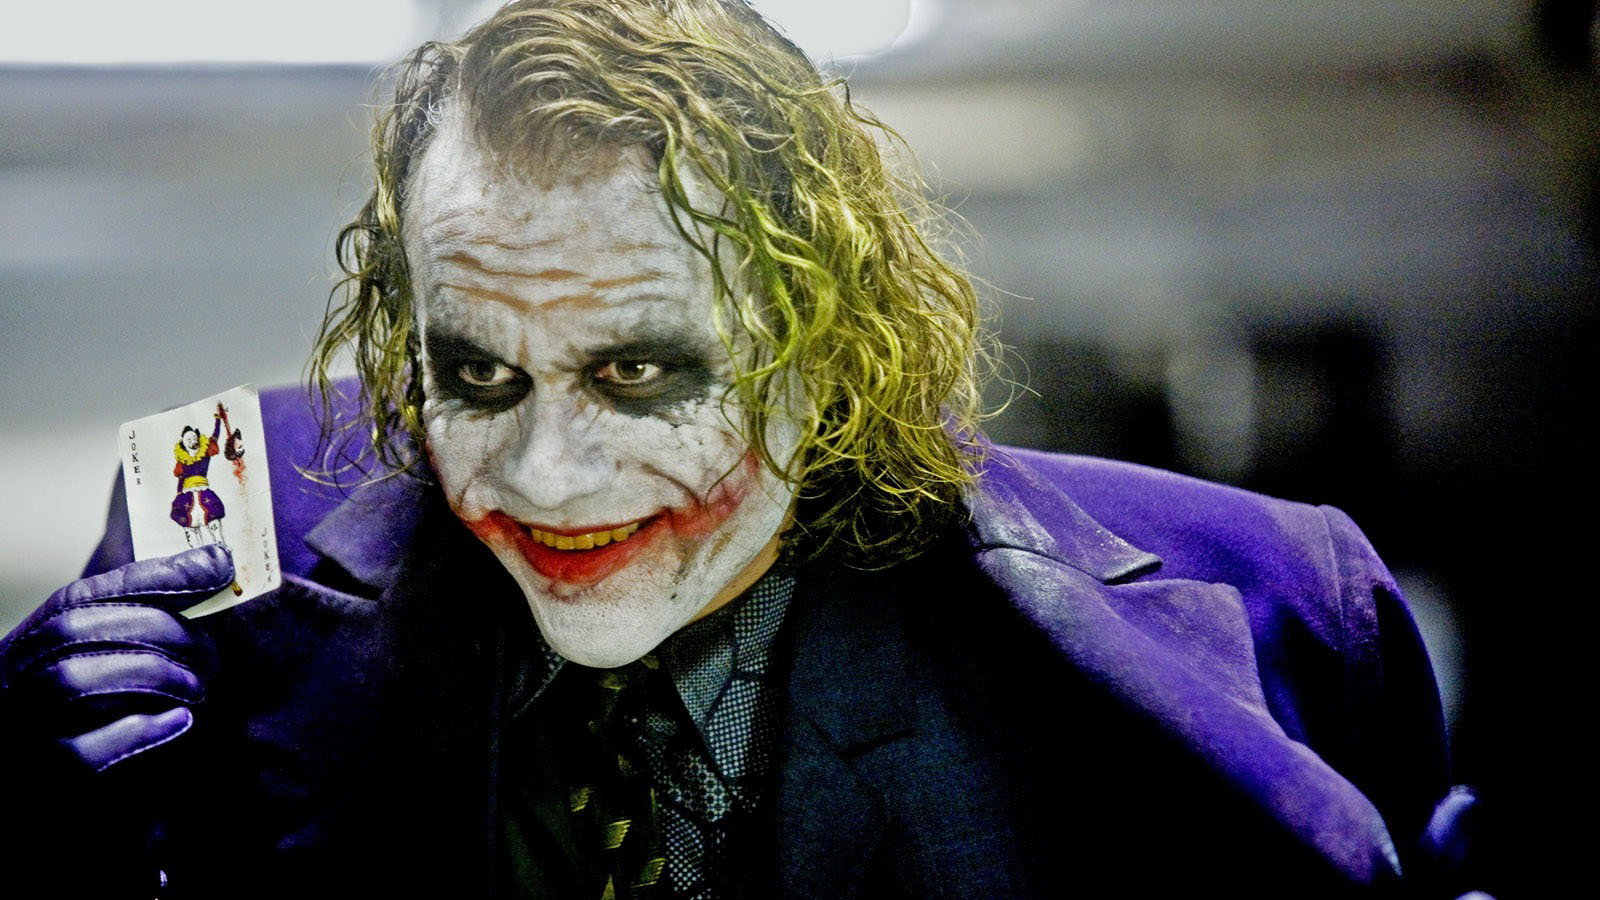 The Joker is a fictional character who appears in Christopher Nolan's 2008 superhero film The Dark Knight, based upon the DC Comics character and supe...